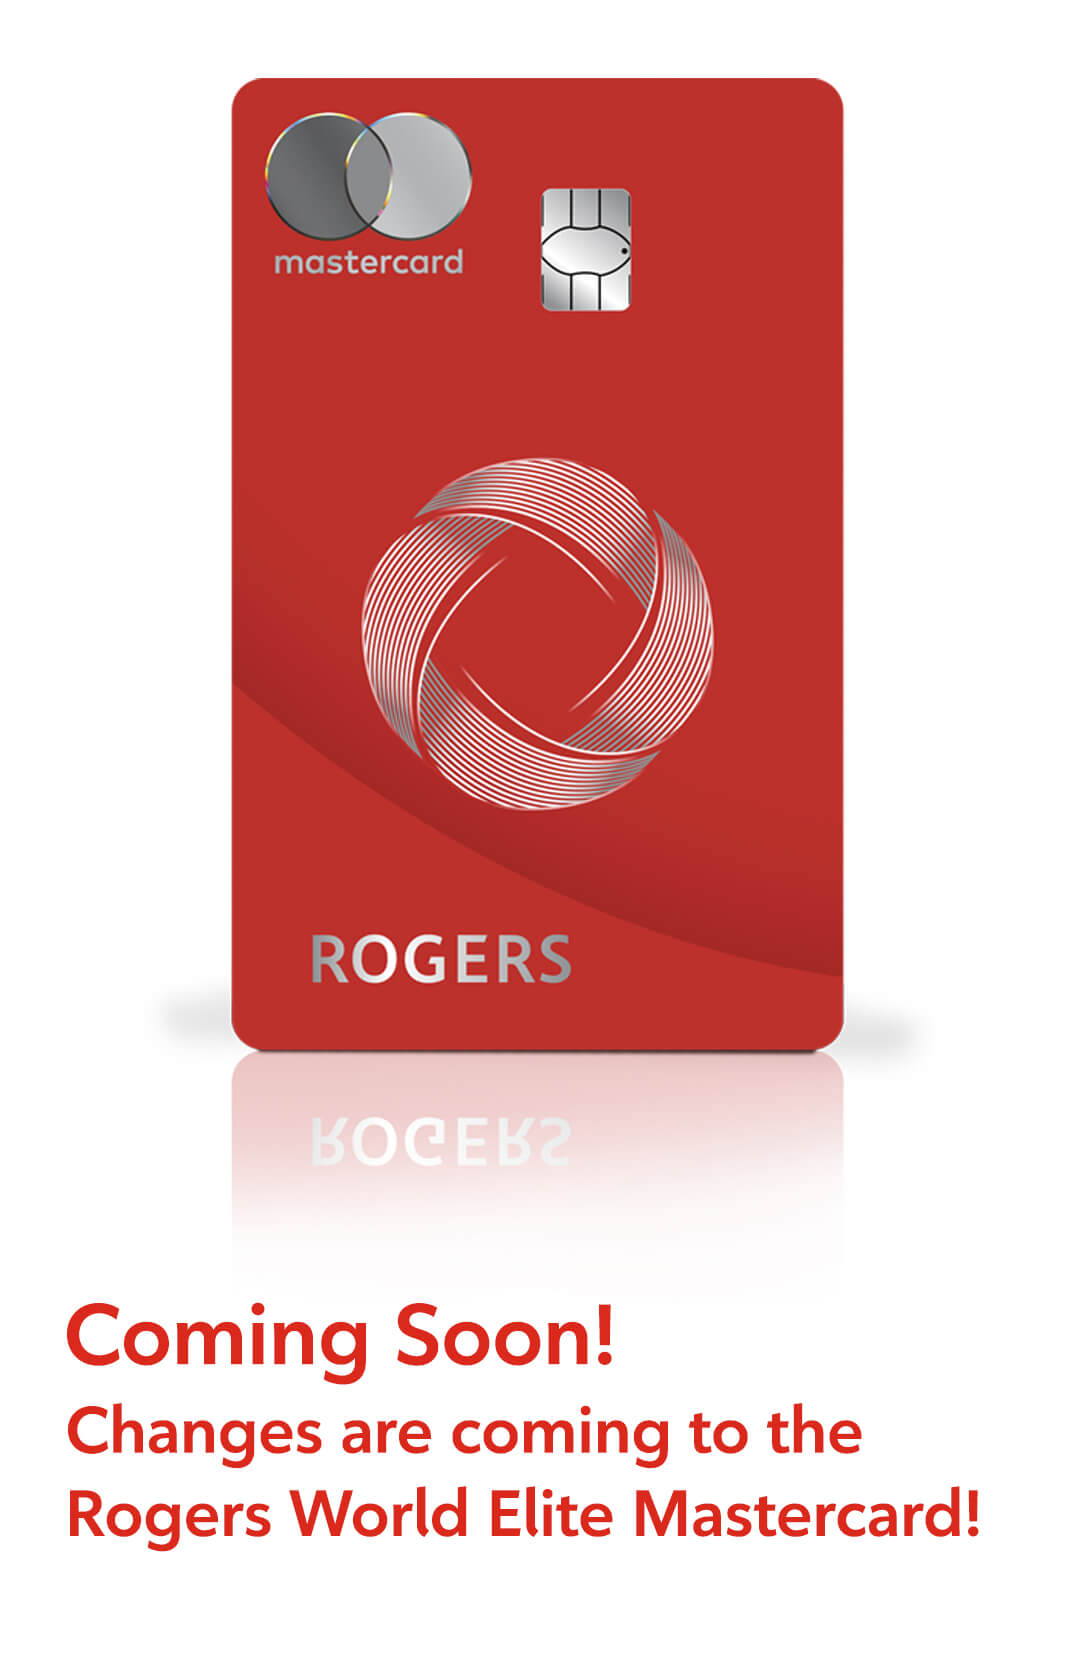 Learn more about new changes coming to the Rogers World Elite Mastercard